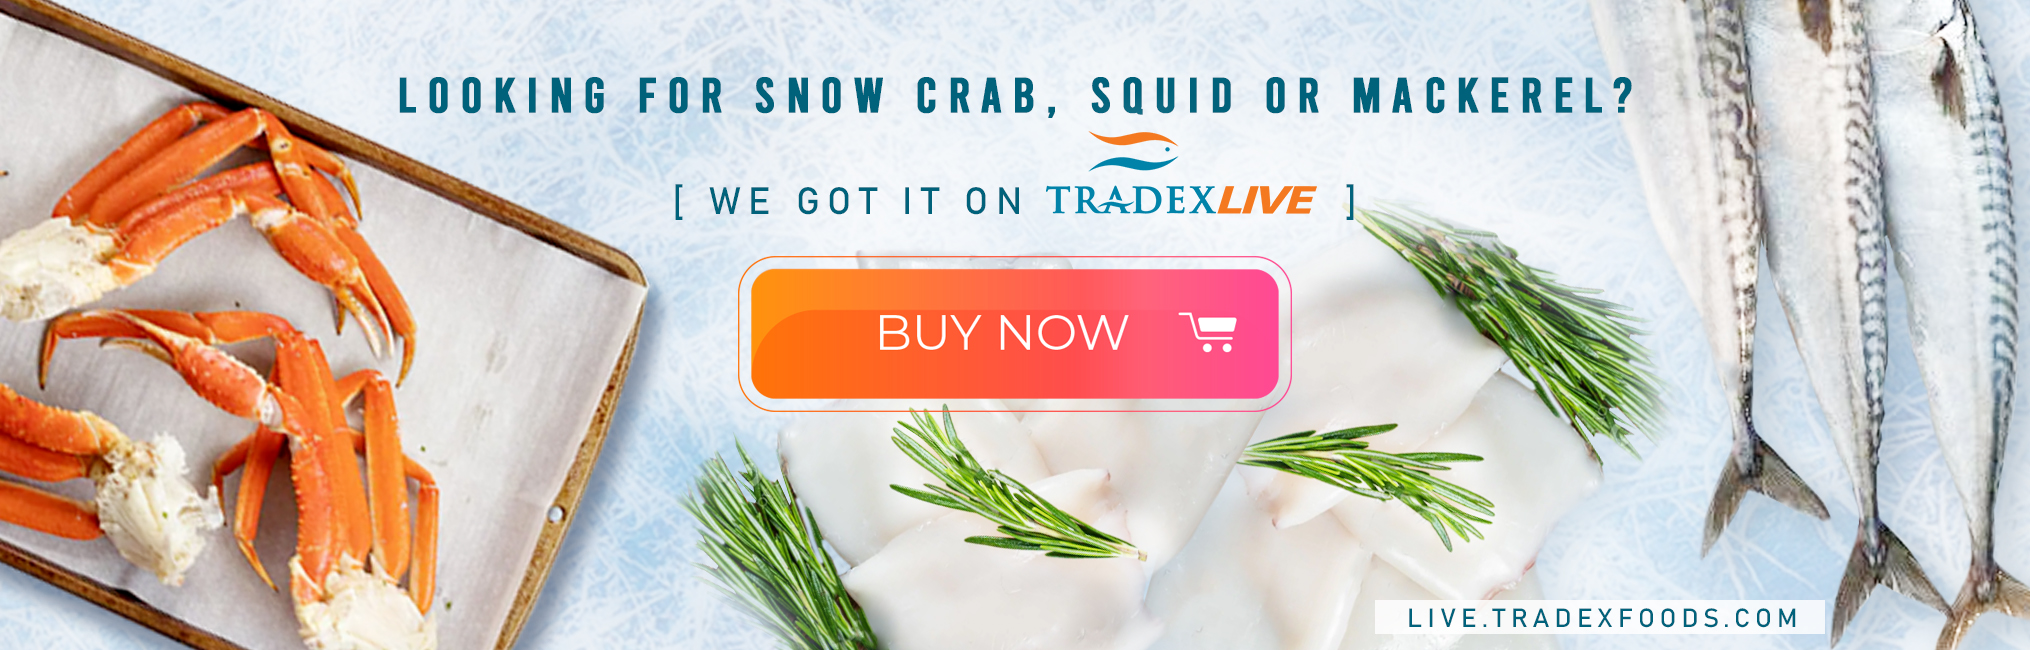 Tradex LIVE - The World's Seafood Market Place